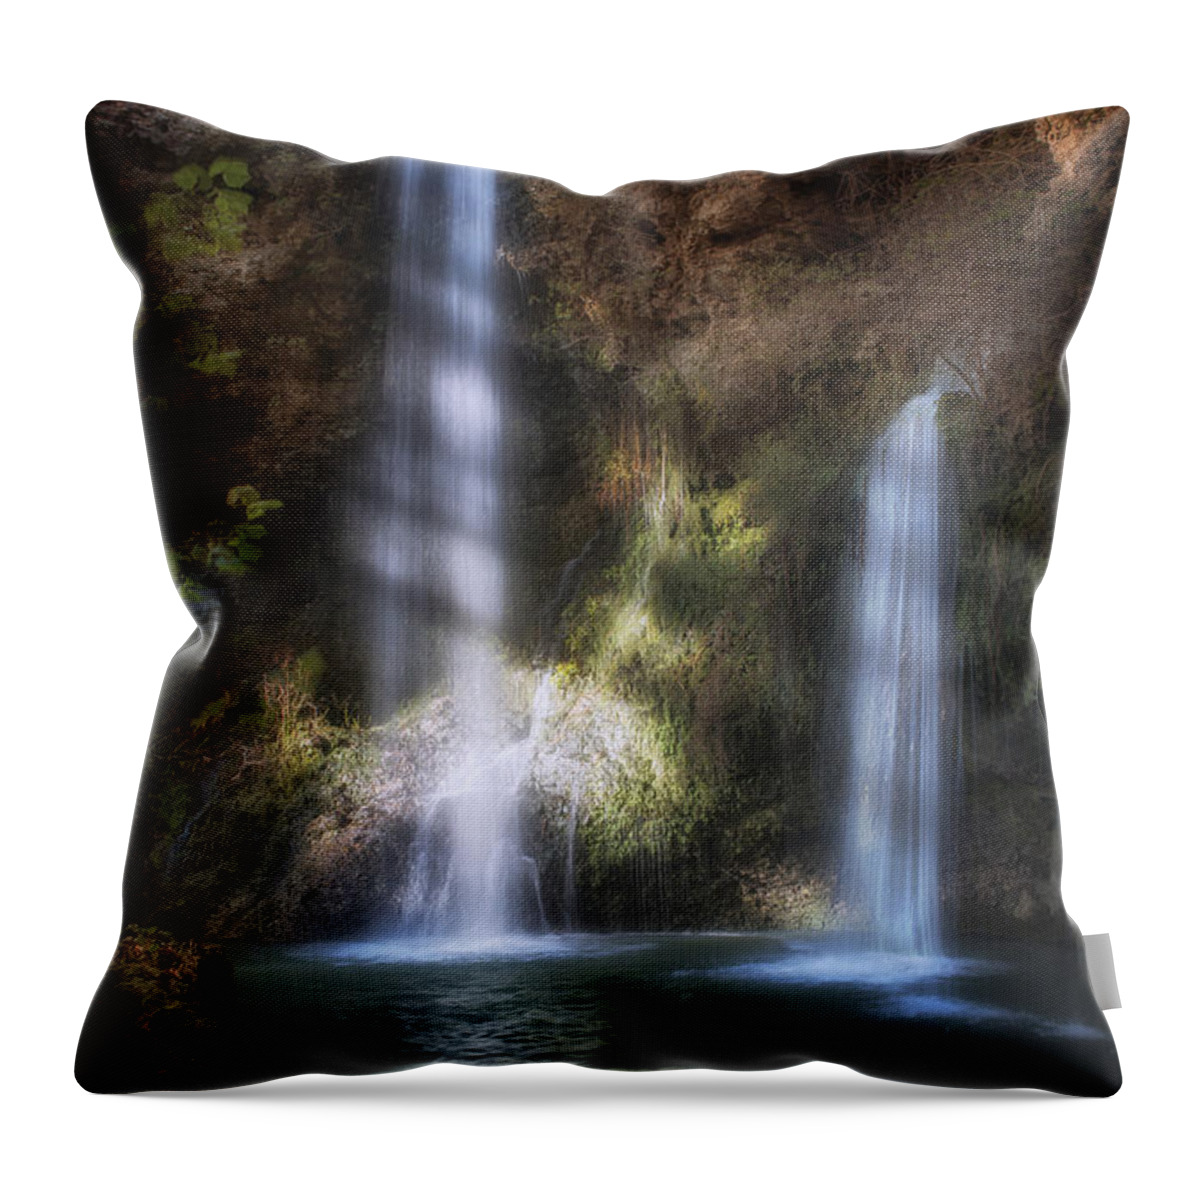 Tree Throw Pillow featuring the photograph Dripping Springs Falls by Tamyra Ayles